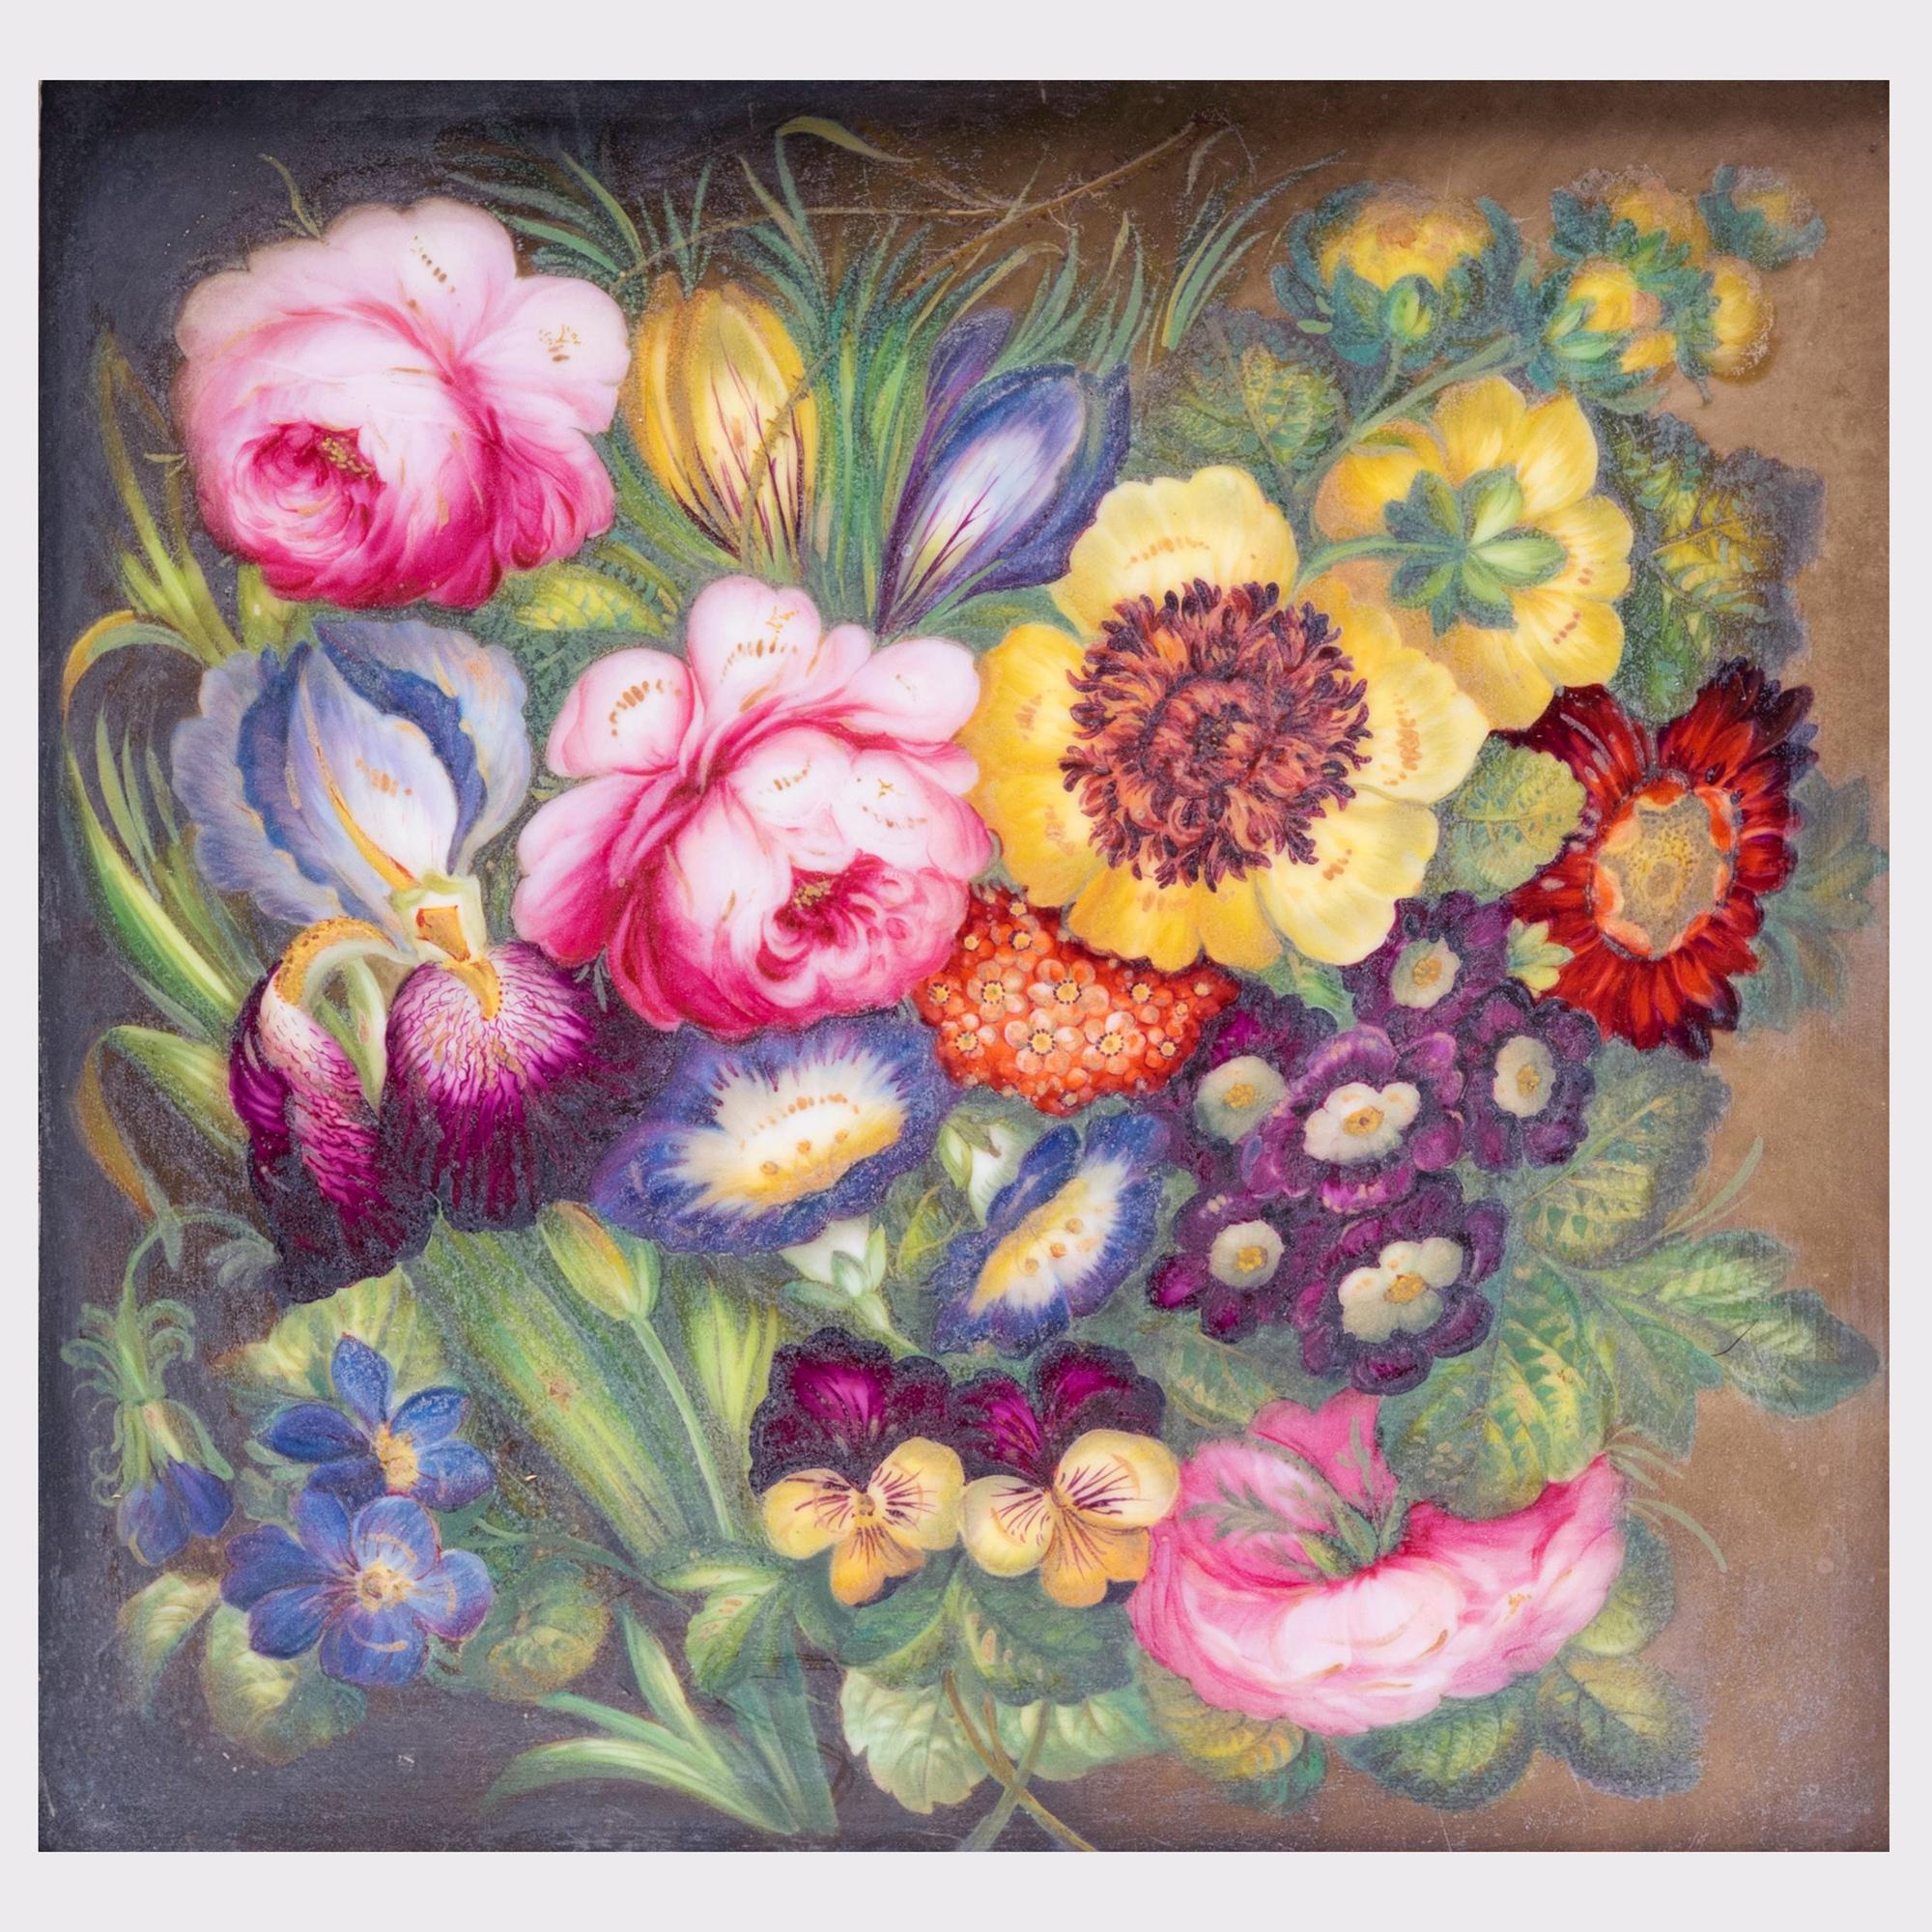 English Porcelain porcelain botanical plaque, 
Probably Derby Porcelain

The framed porcelain square plaque is beautifully painted with a bouquet of flowers including roses, crocuses, iris and pansies placed on a dark brown